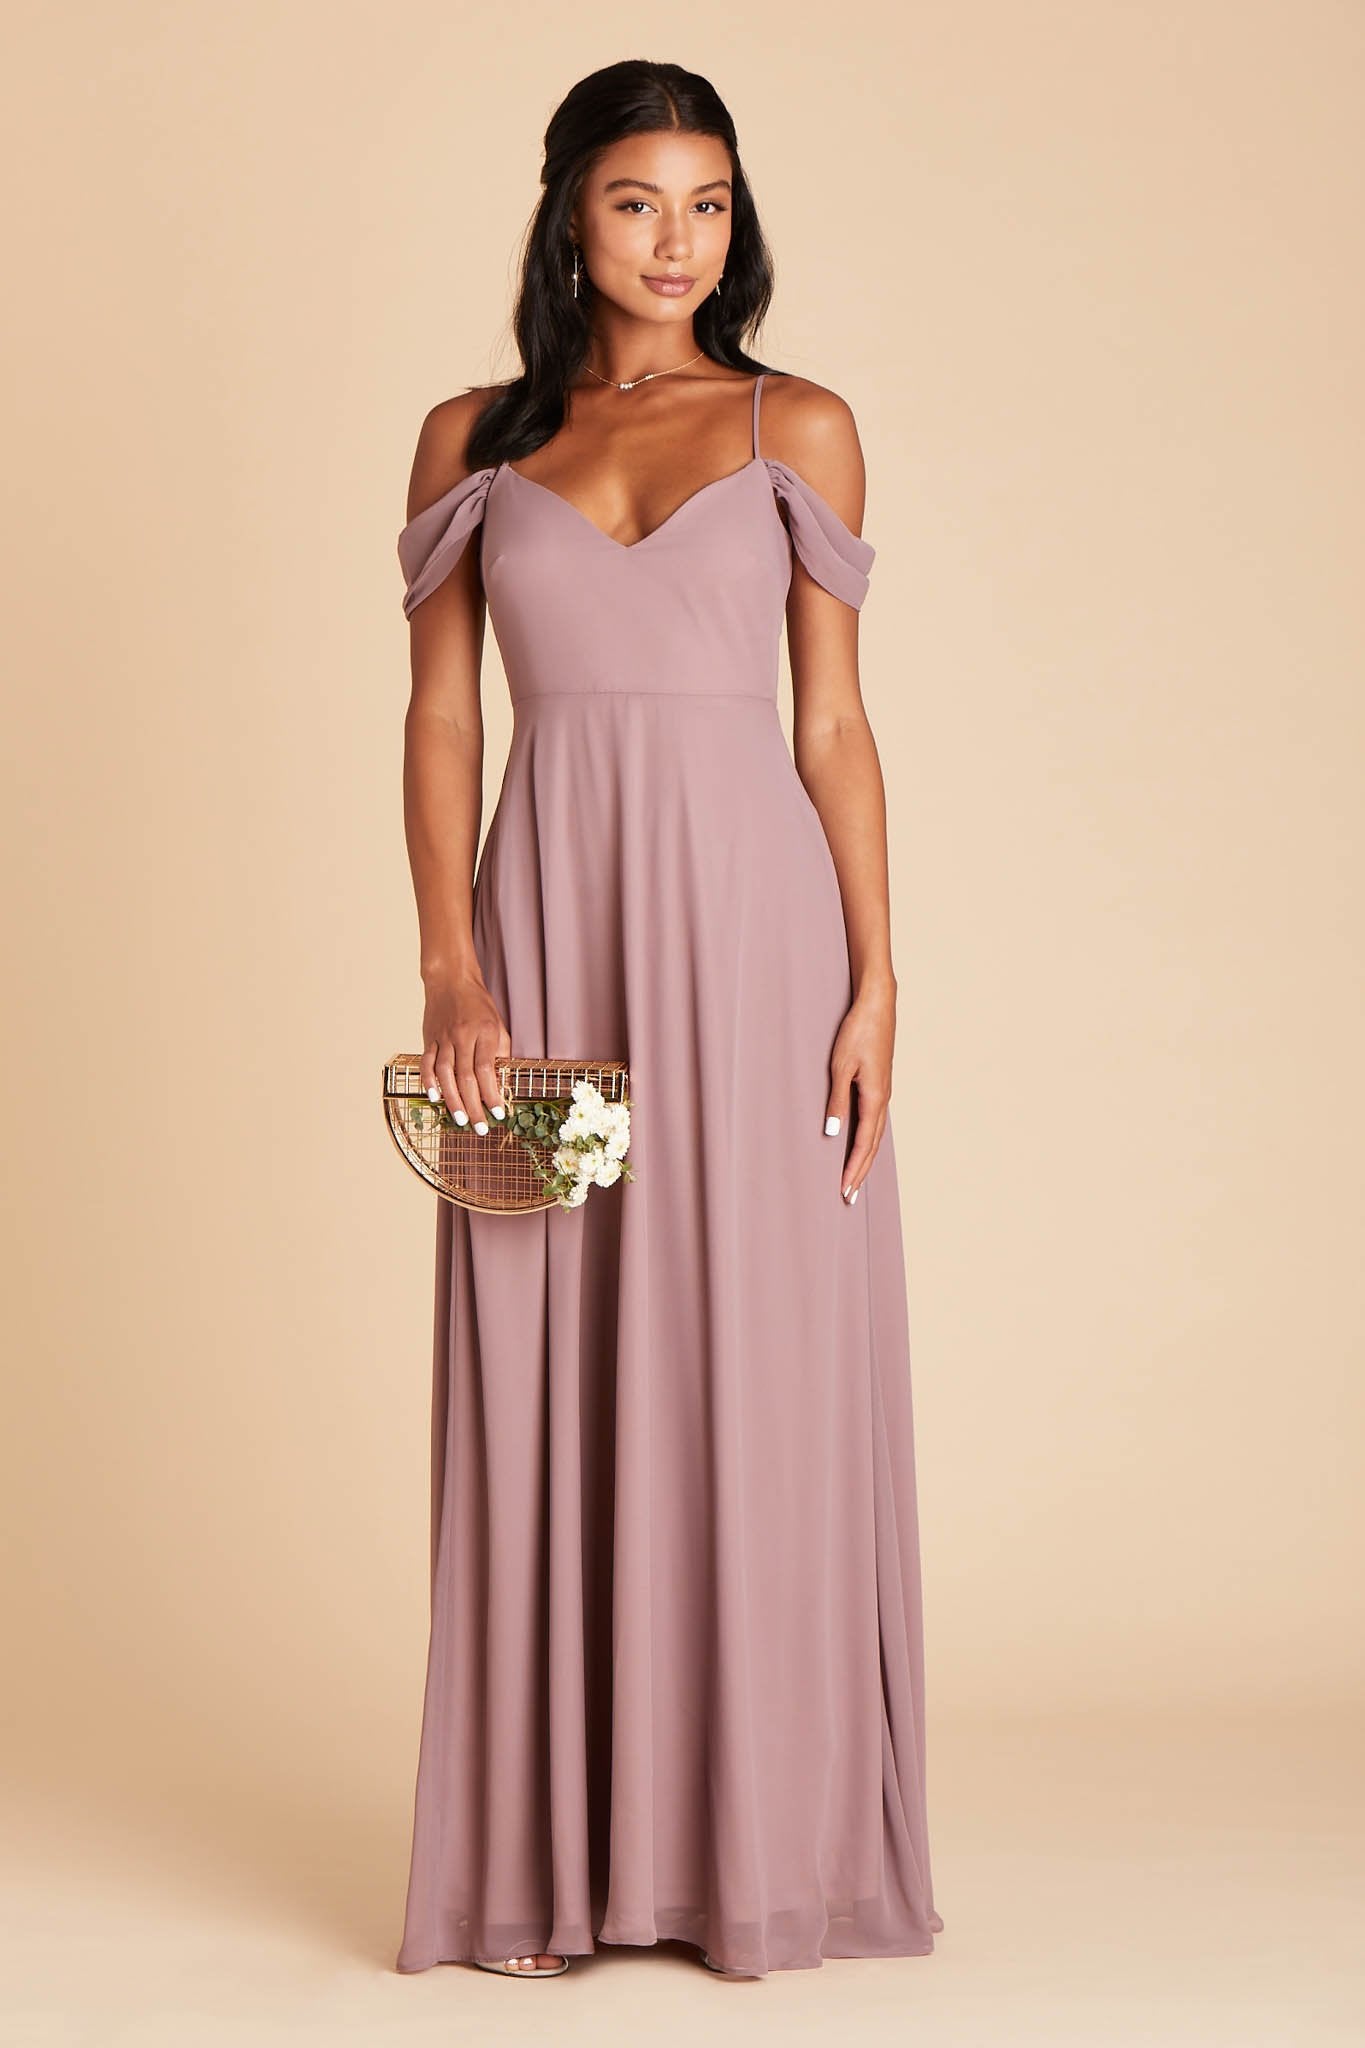 Devin convertible bridesmaid dress in dark mauve chiffon by Birdy Grey, front view